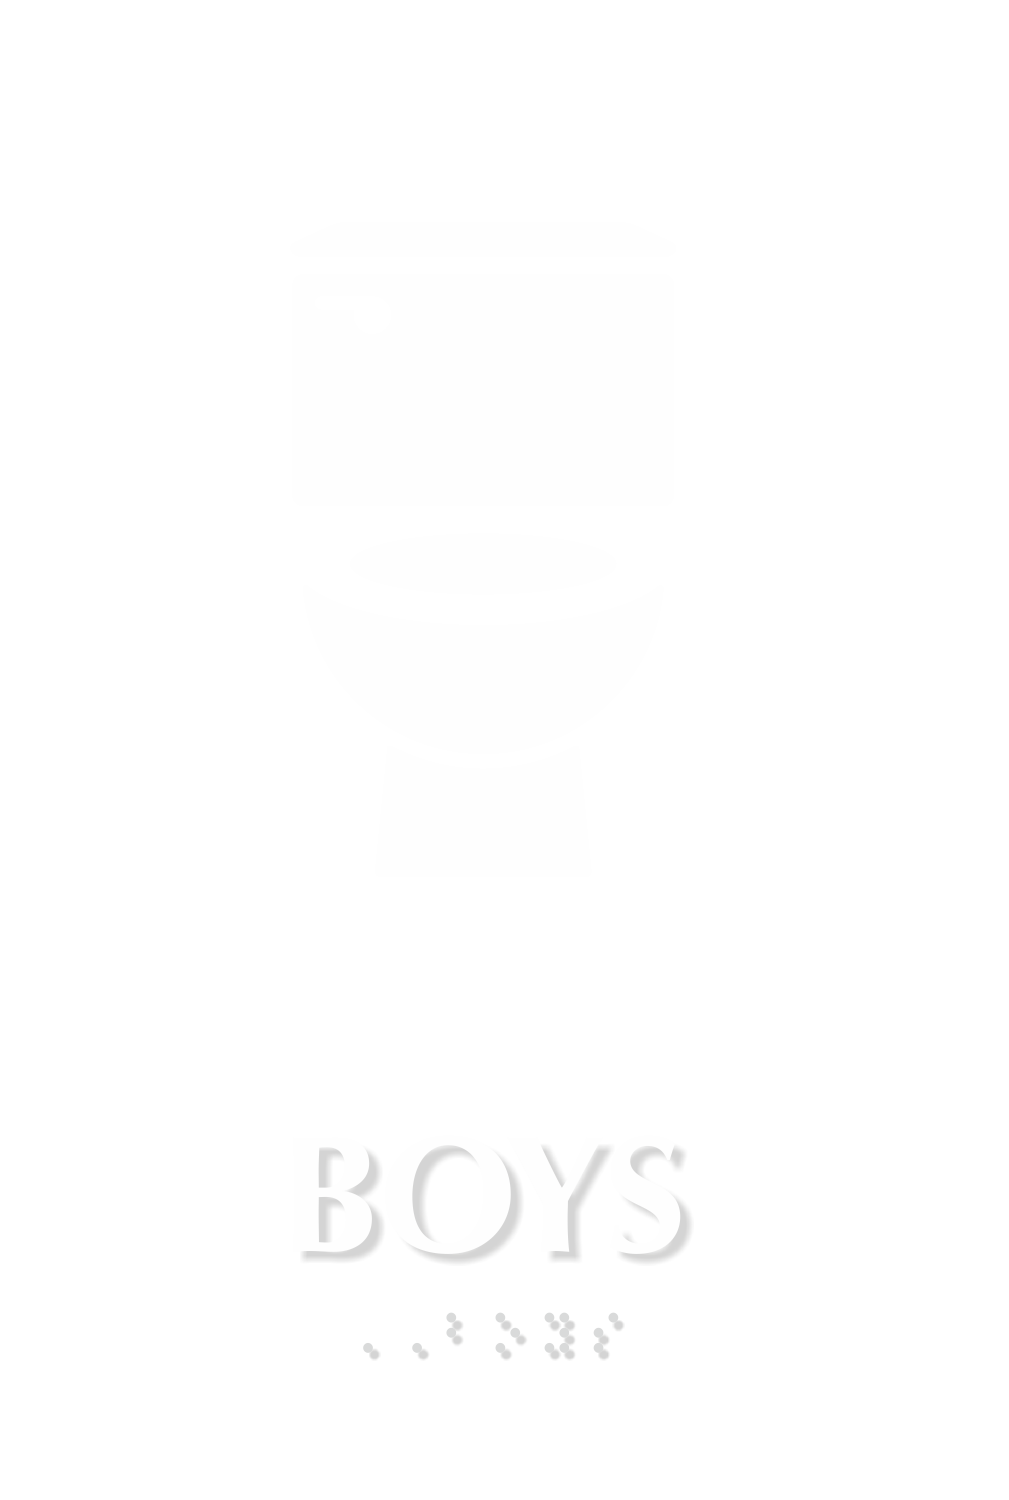 Boys TactileTouch Braille Restroom Sign